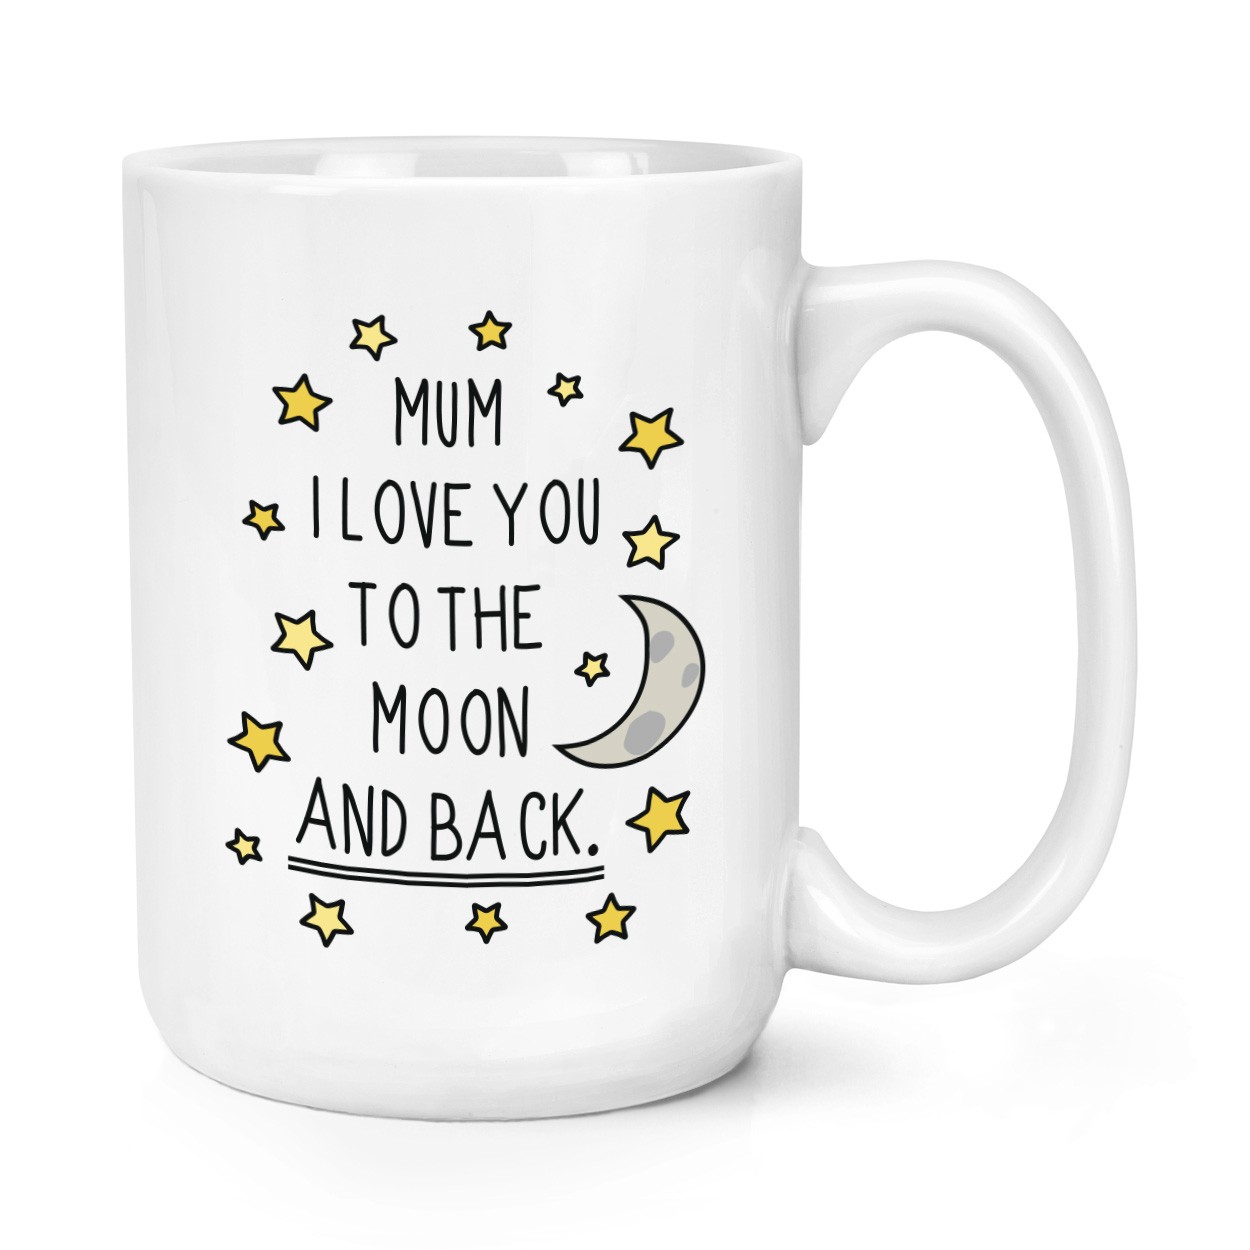 Mum I Love You To The Moon And Back 15oz Large Mug Cup